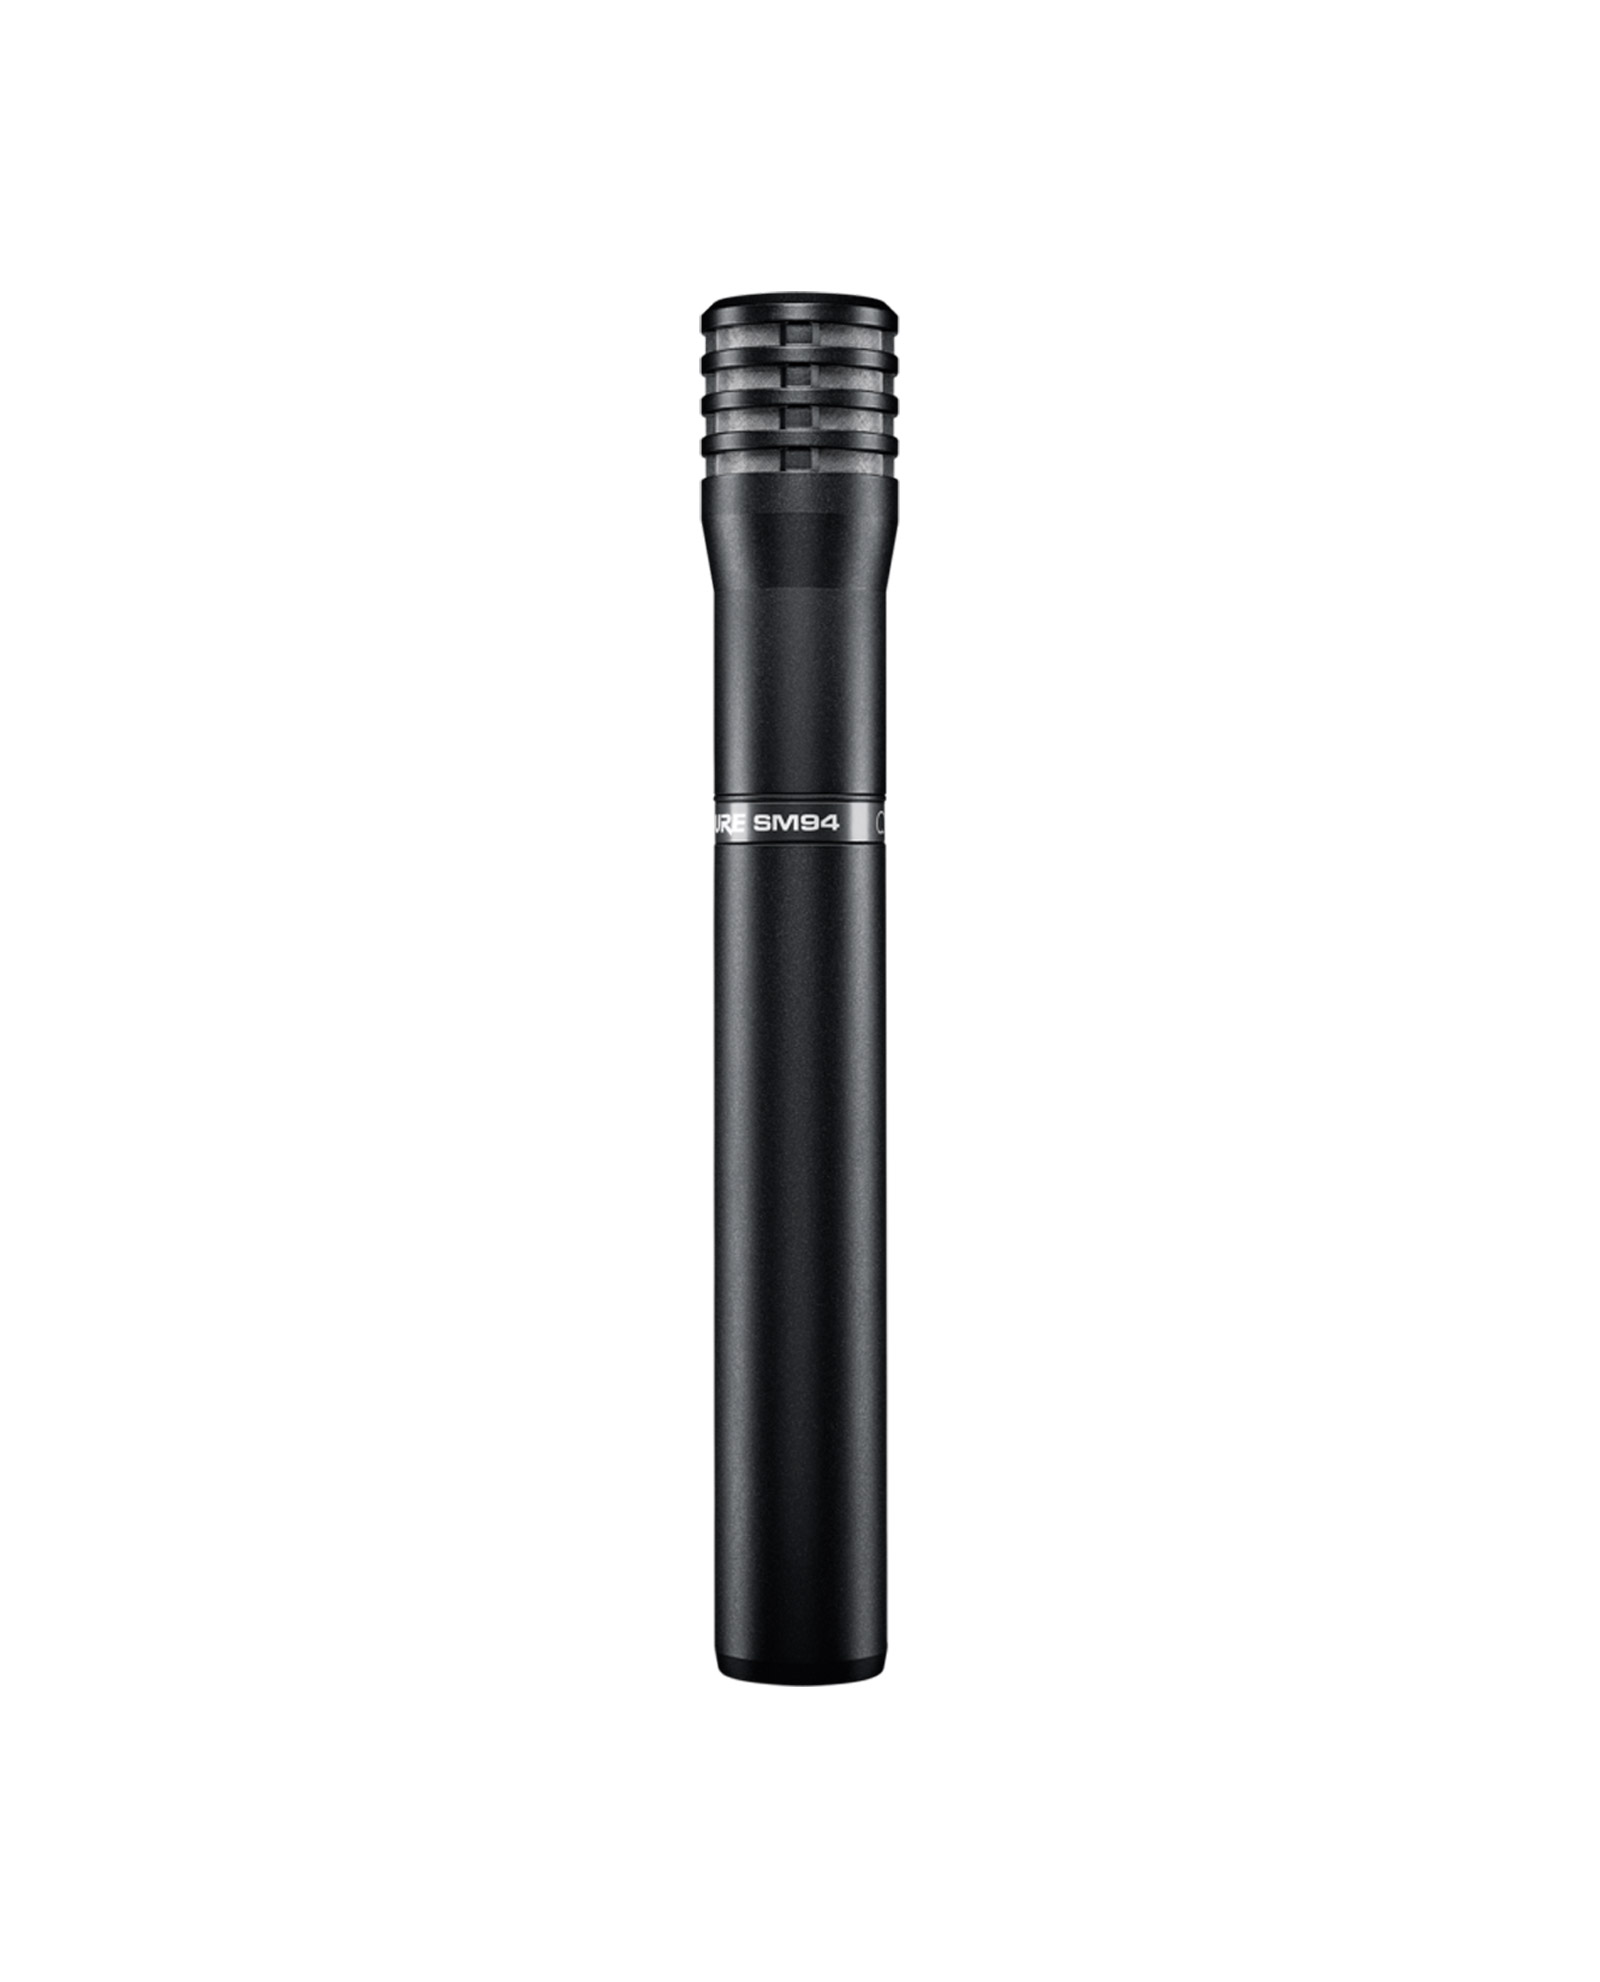 Shure Sm94 Instrument Microphone